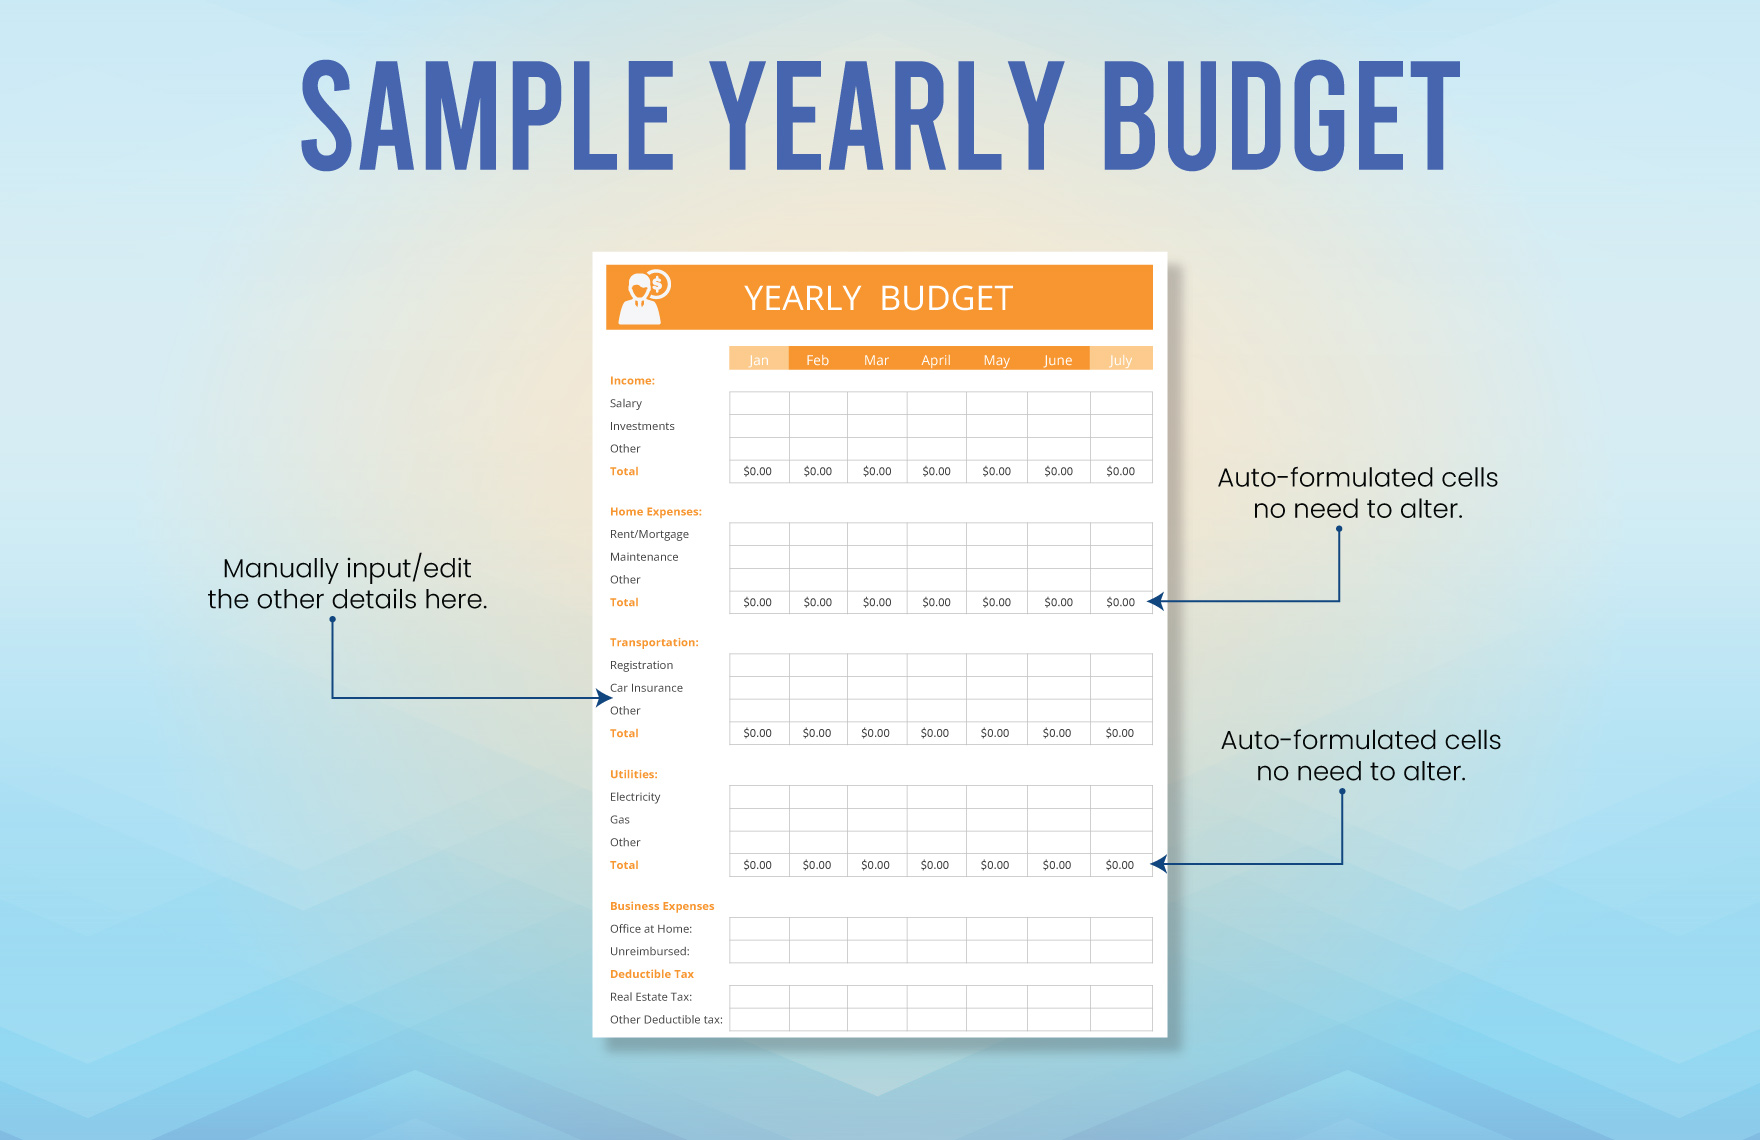 Sample Yearly Budget Template